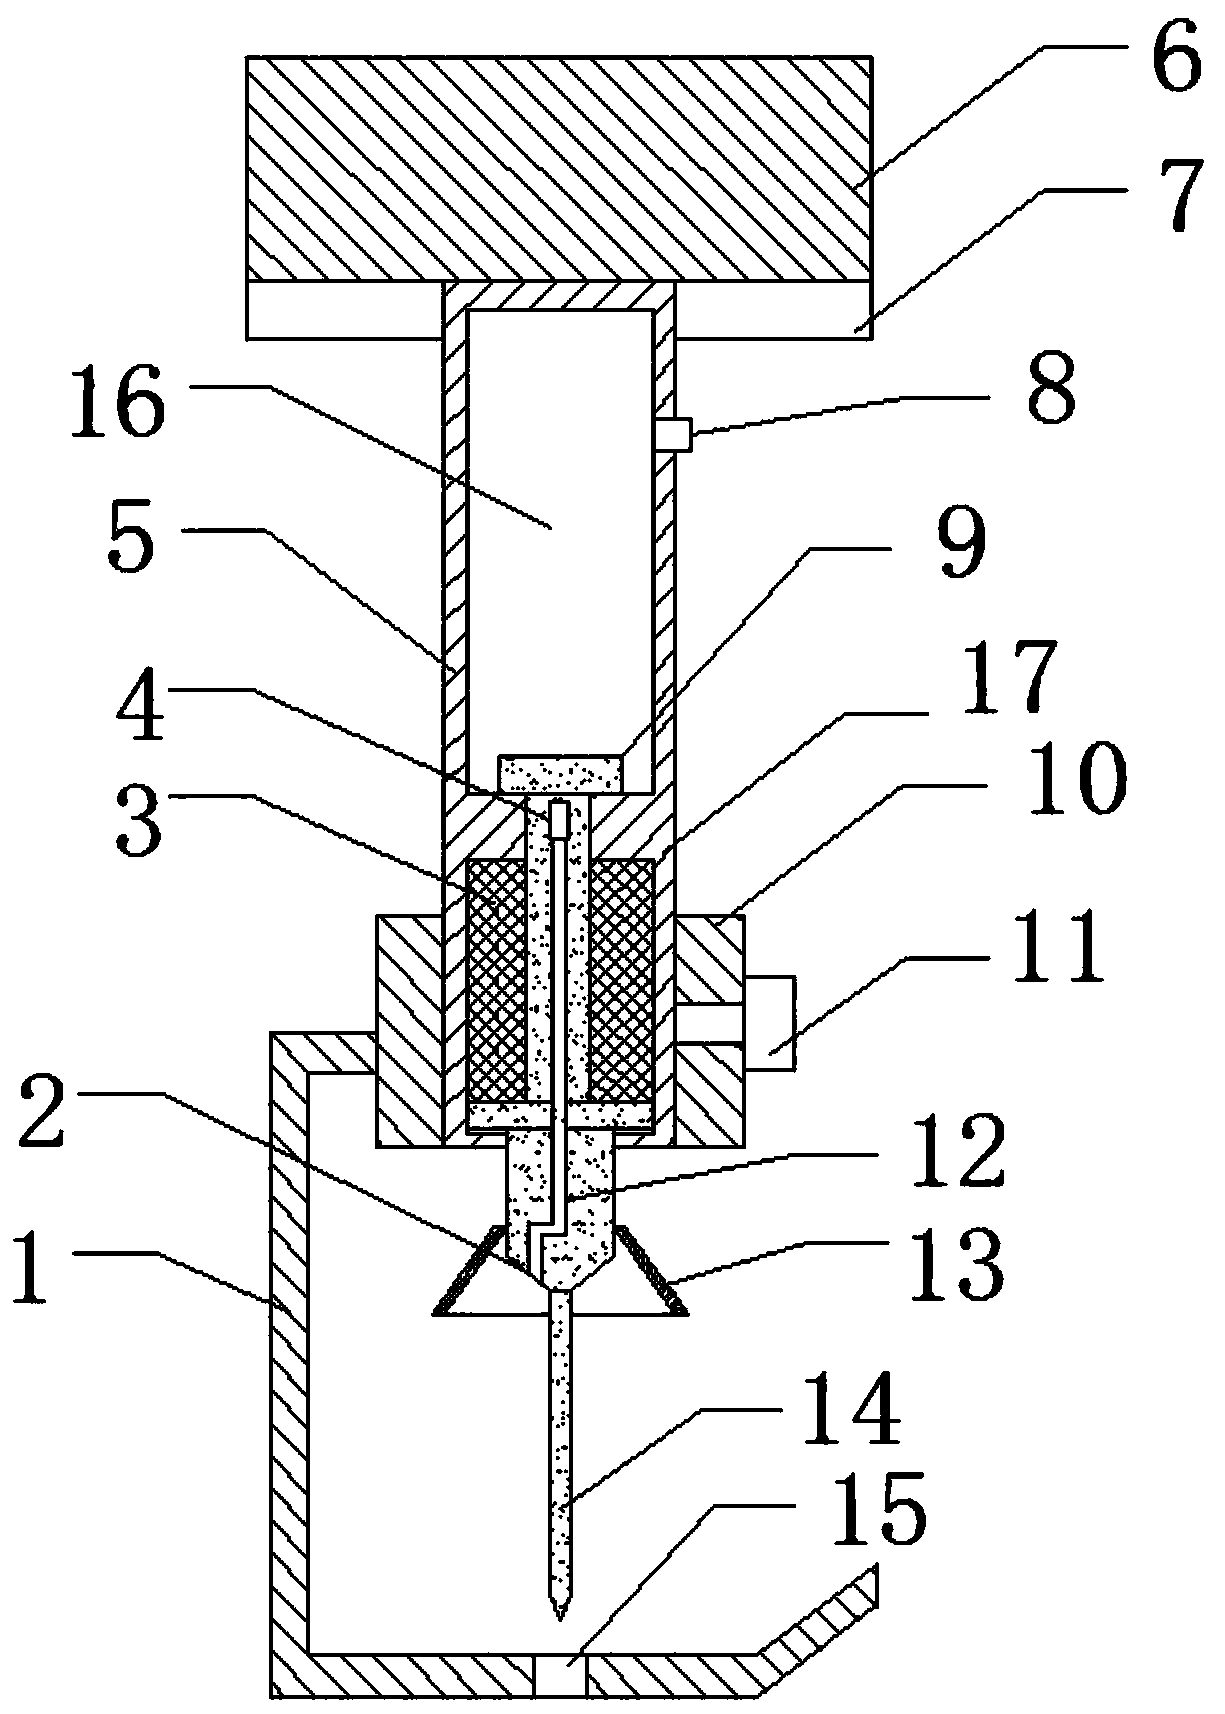 A needle seat device for quilt function shock absorption and noise reduction